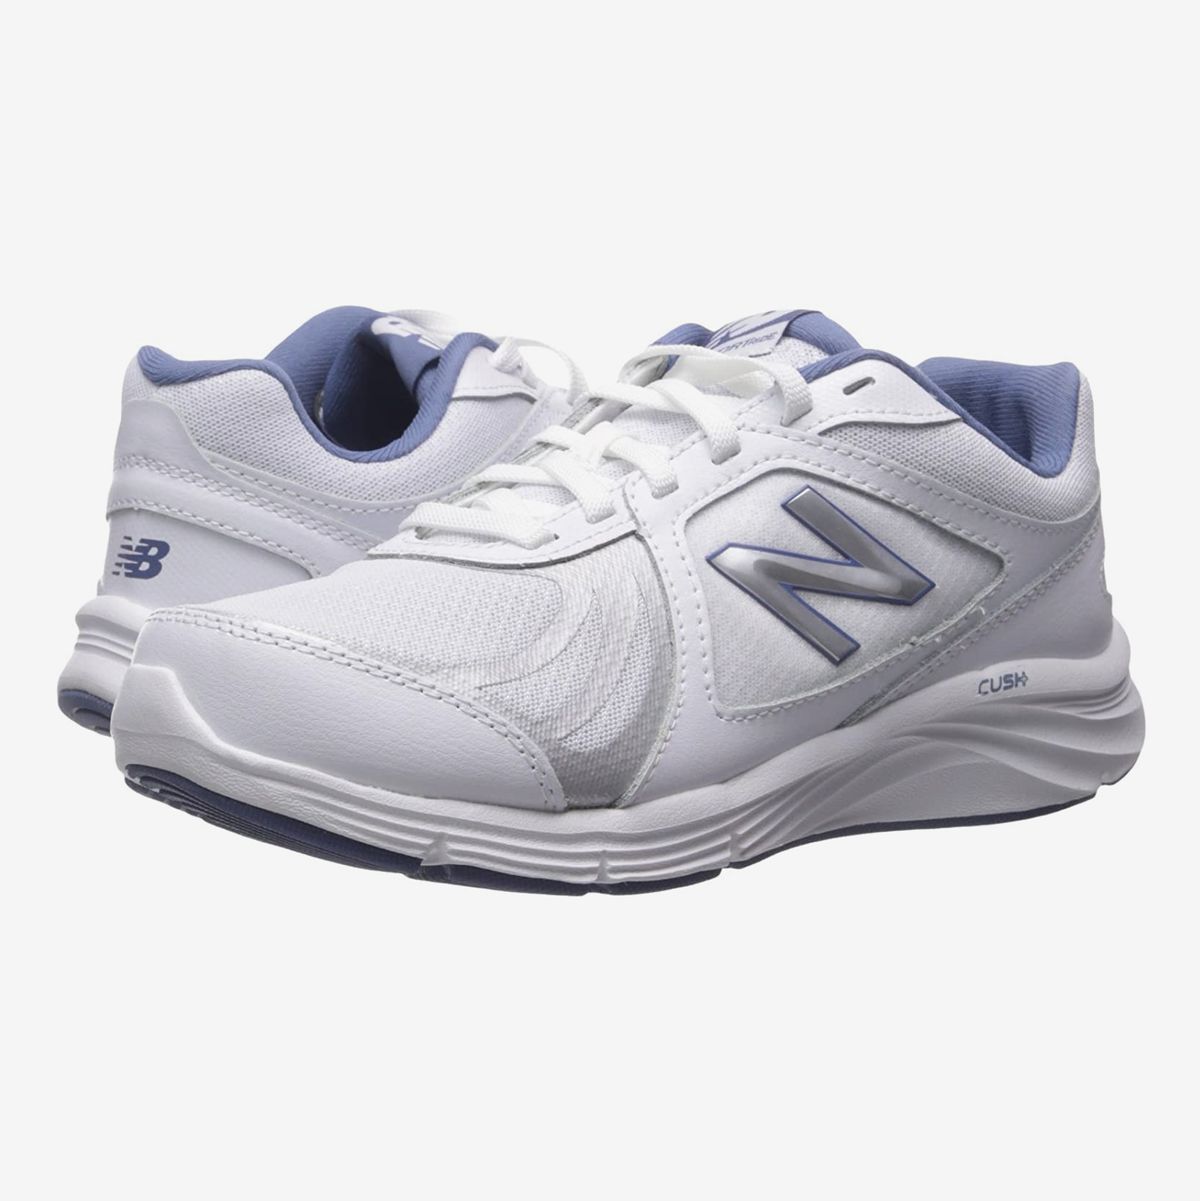 new balance safety shoes womens